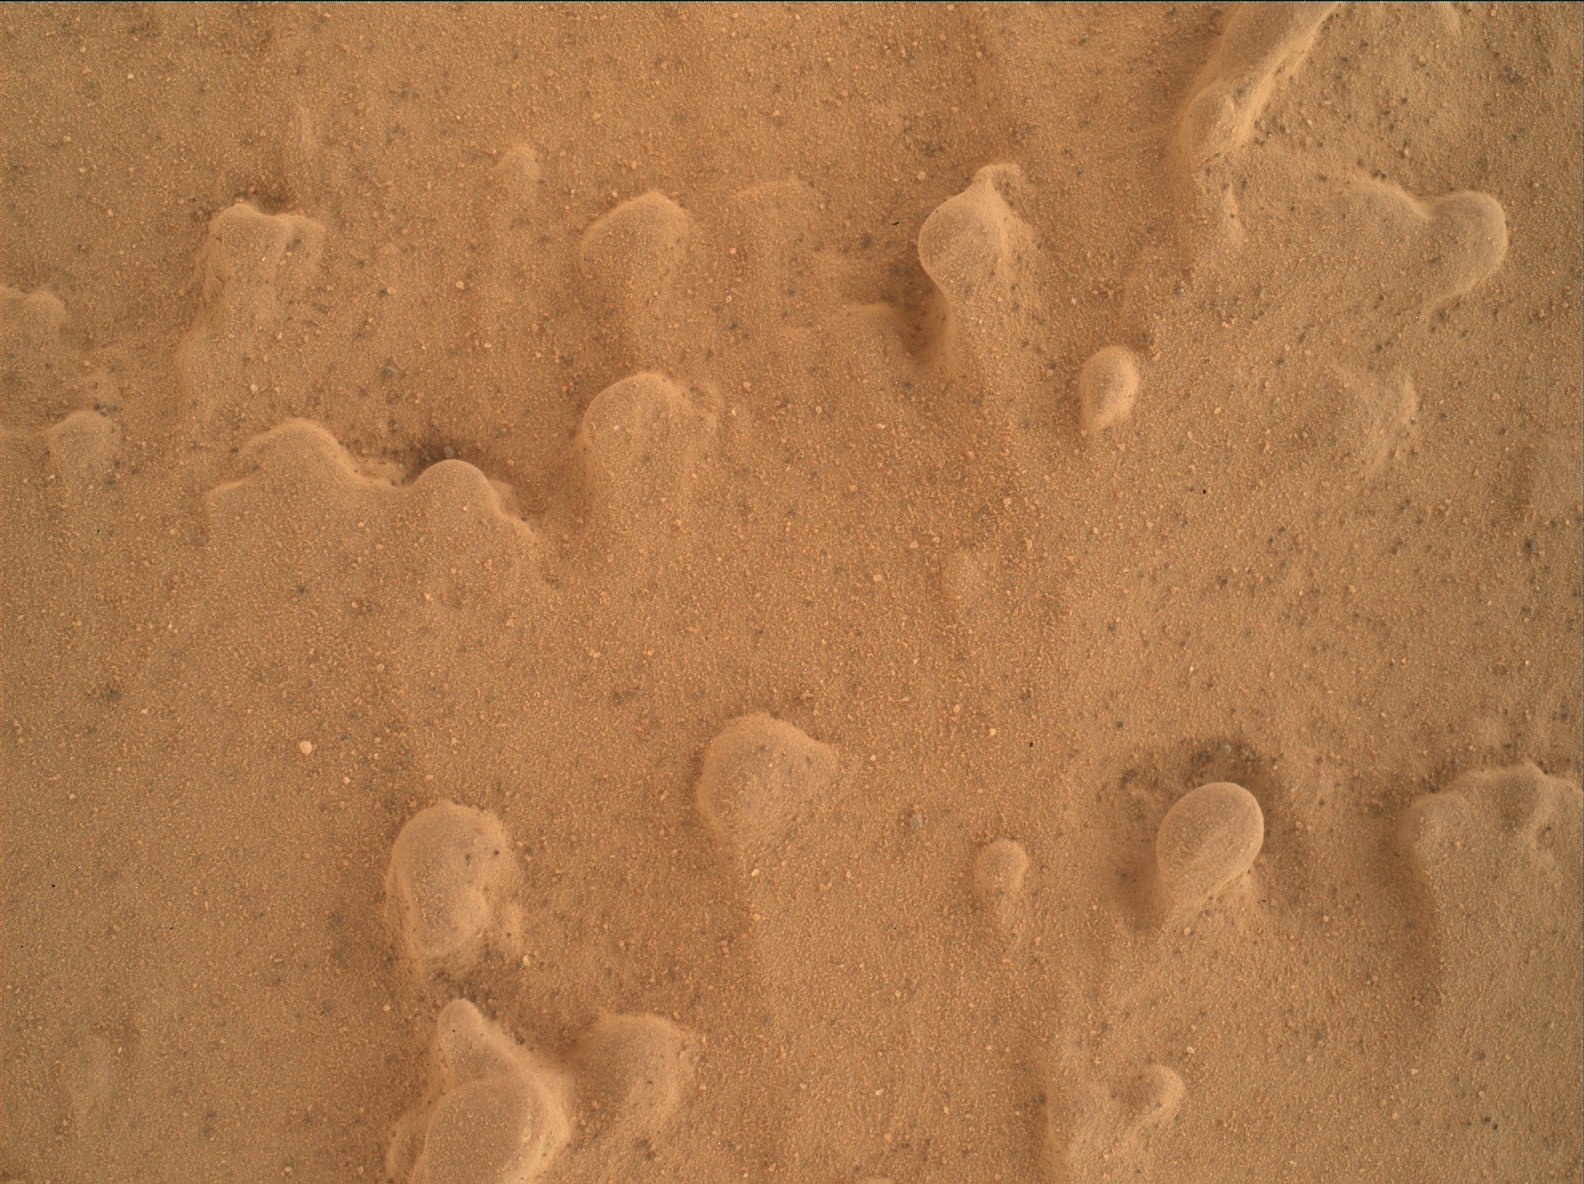 Nasa's Mars rover Curiosity acquired this image using its Mars Hand Lens Imager (MAHLI) on Sol 1829